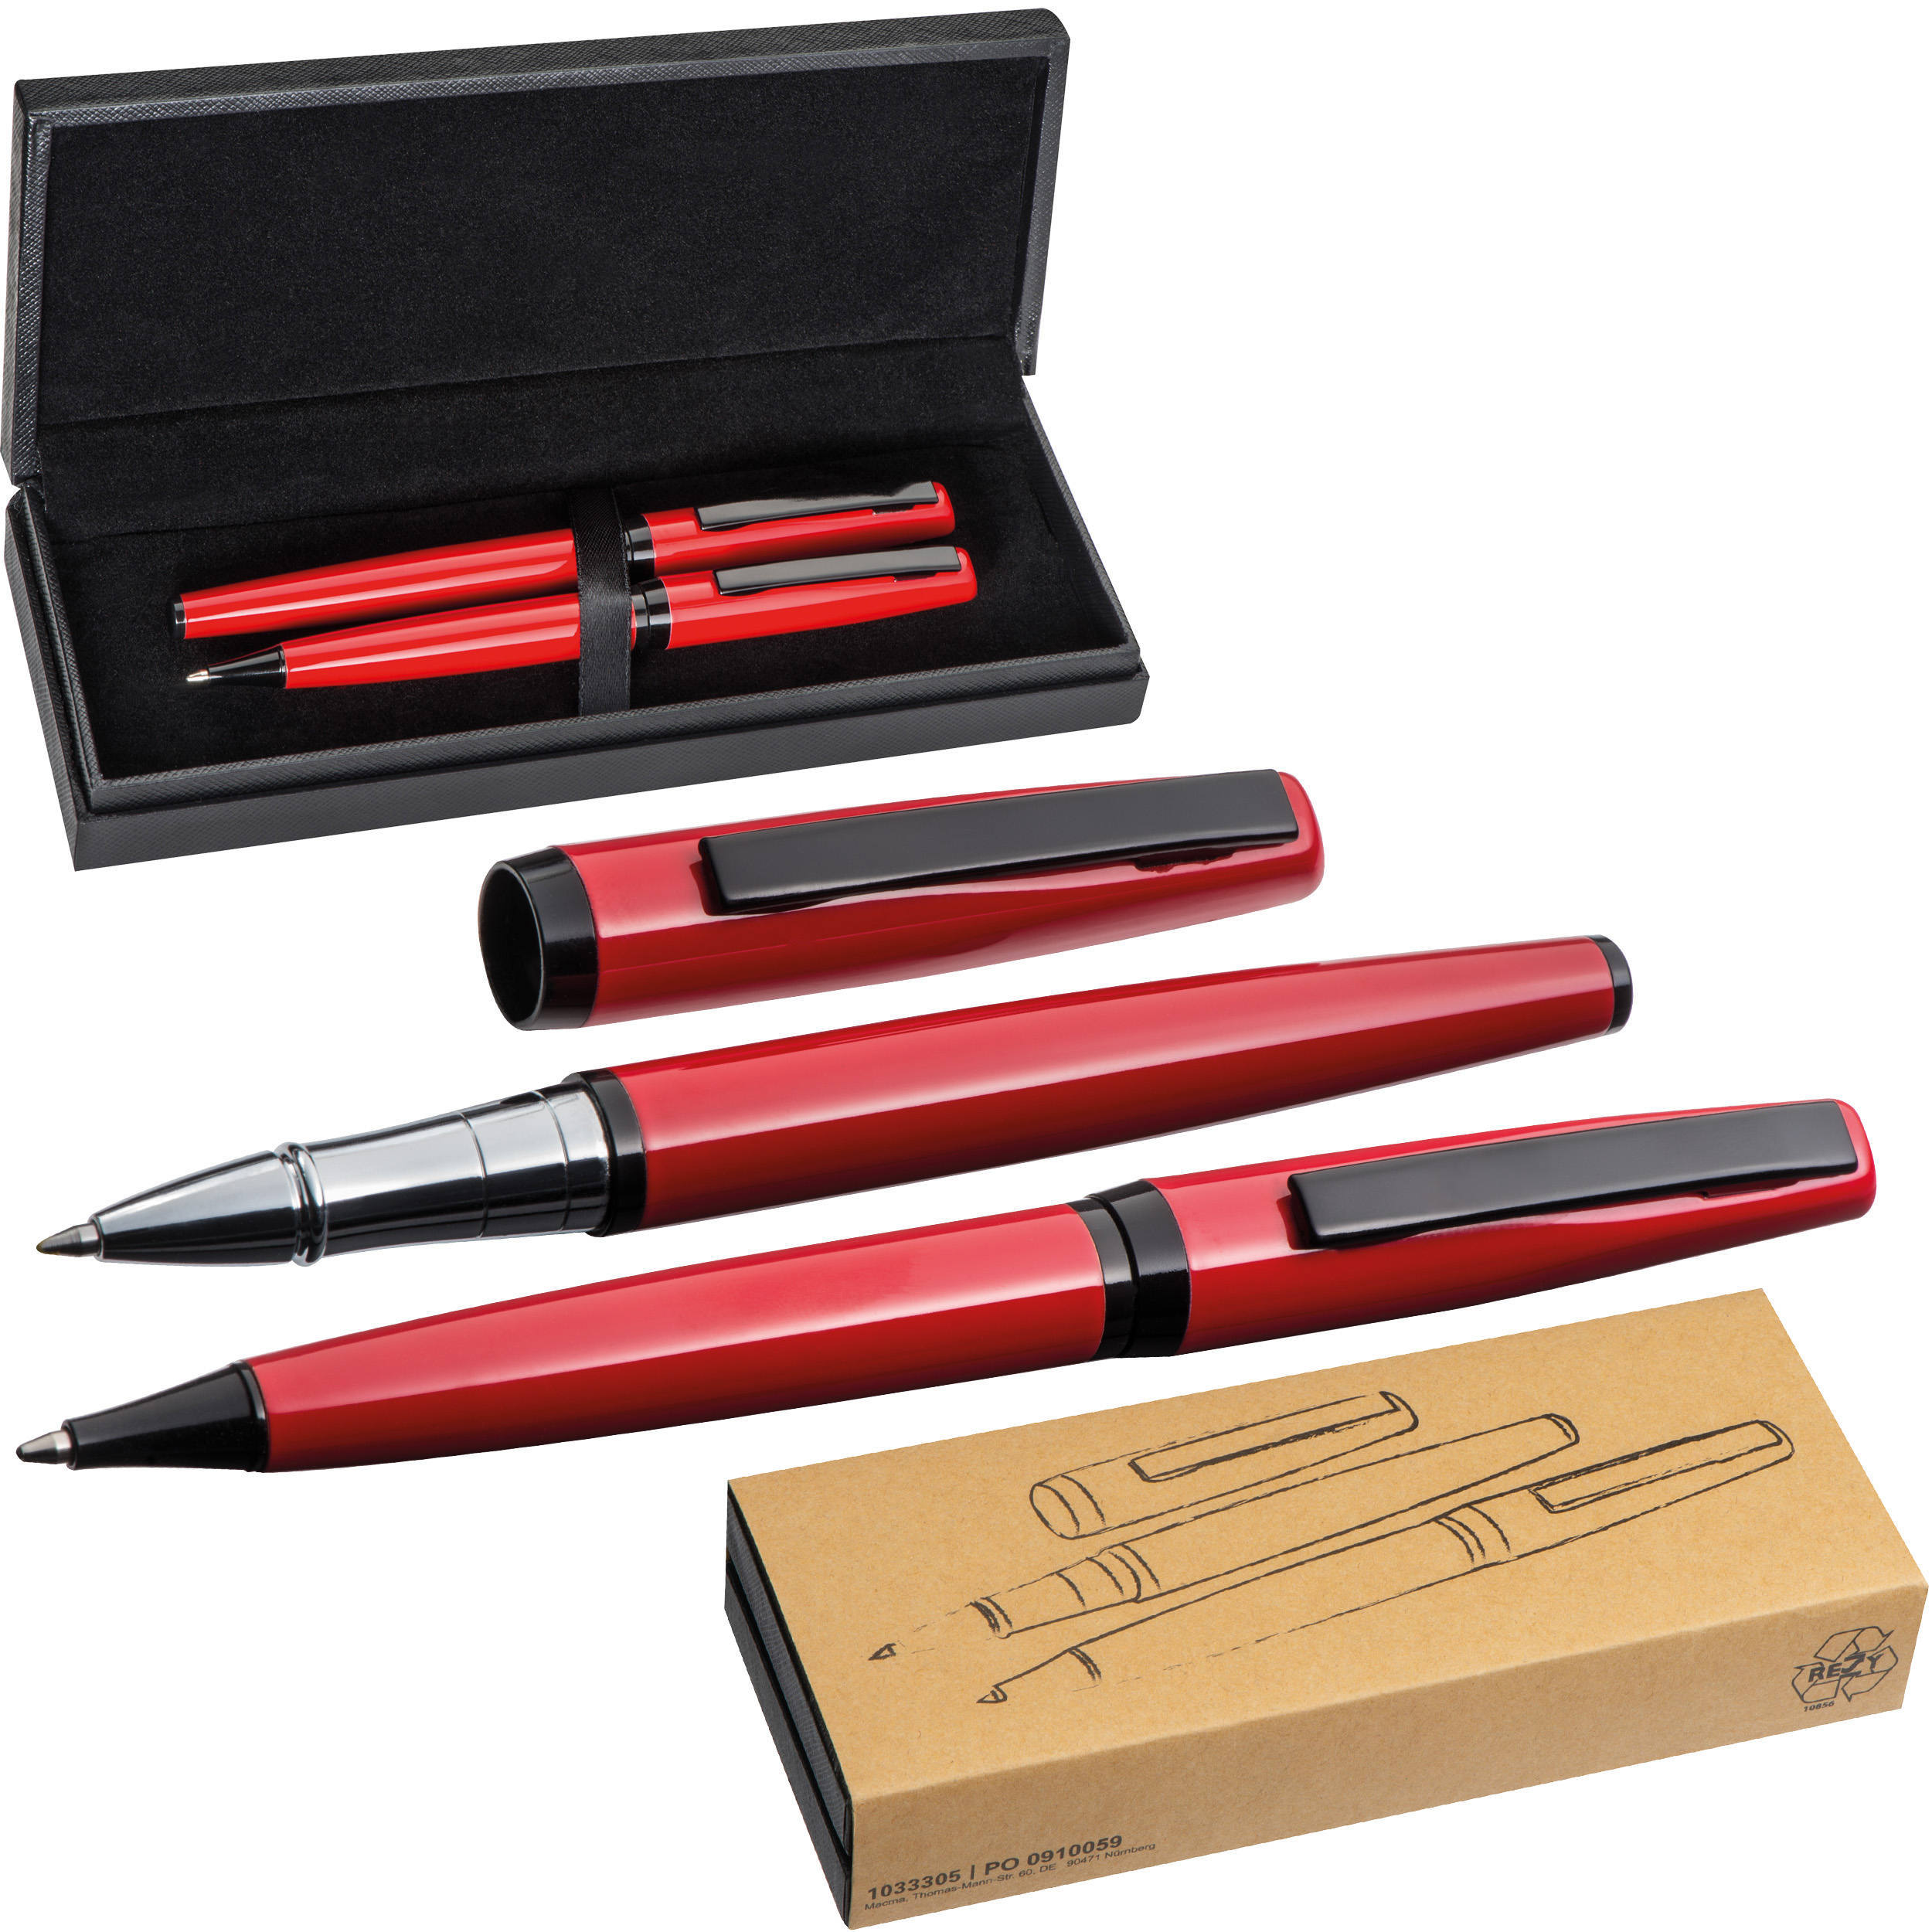 Writing set - red with black accents